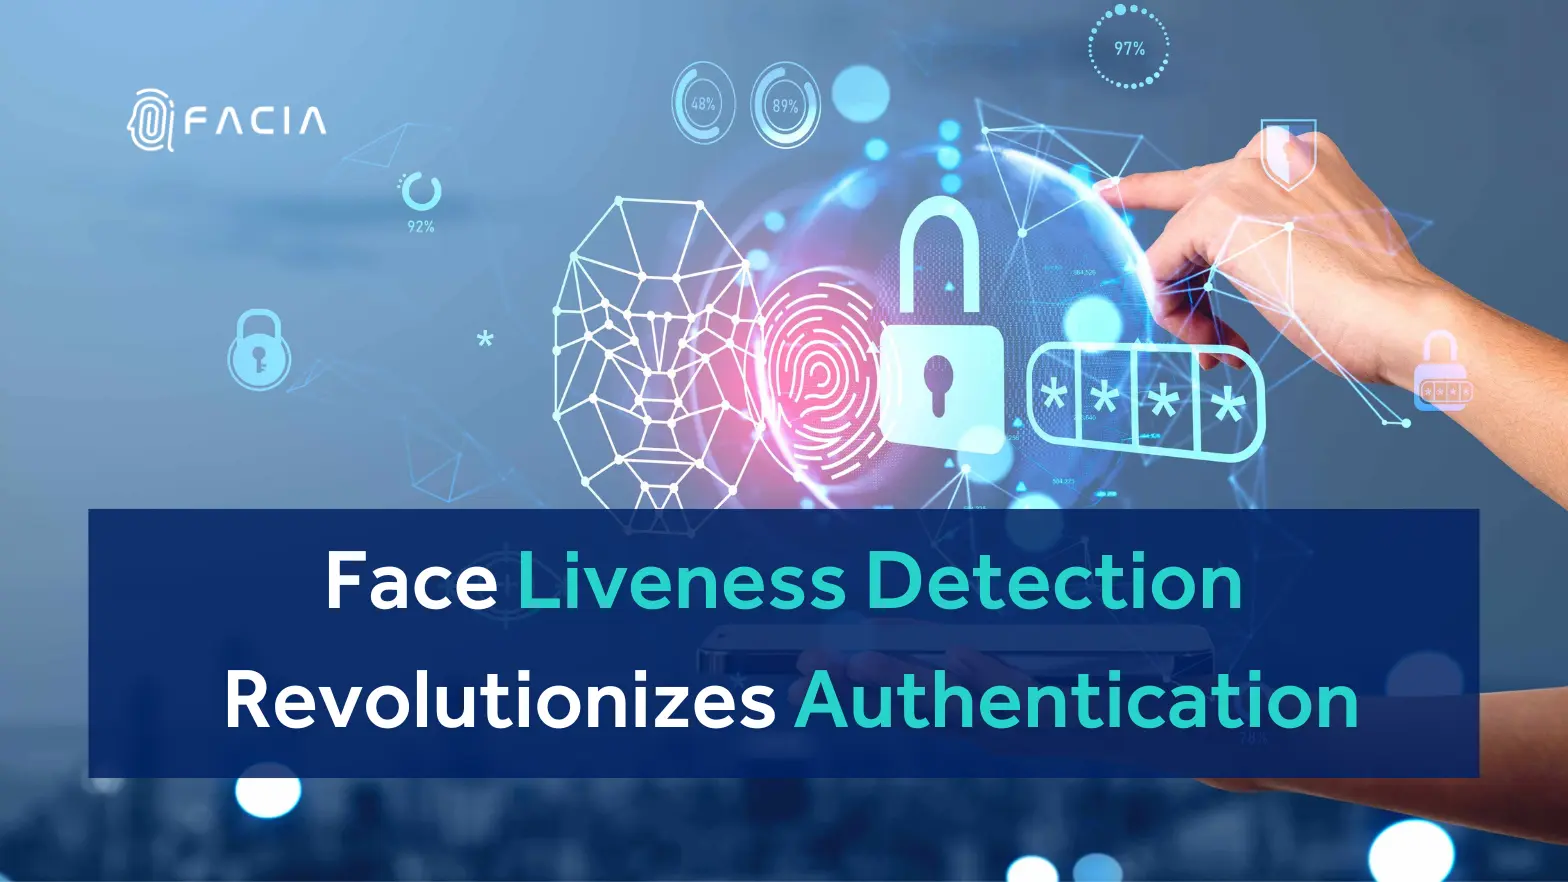 Liveness Detection Technology For Face Recognition System by Facia, for biometric authentication and authorization.